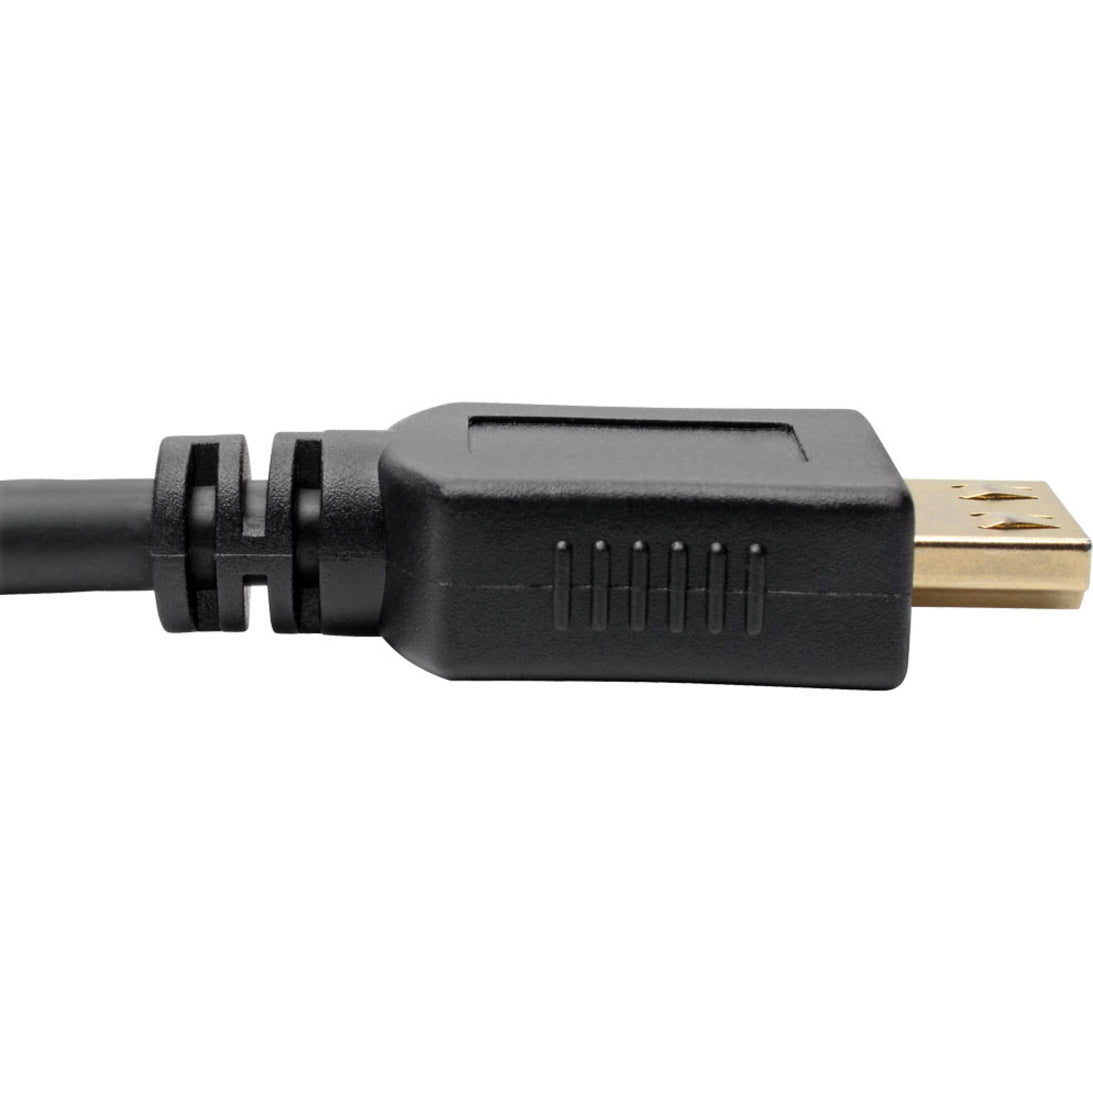 Tripp Lite P568-050-BK-GRP High-Speed HDMI Cable, 50 ft., with Gripping Connectors, Black